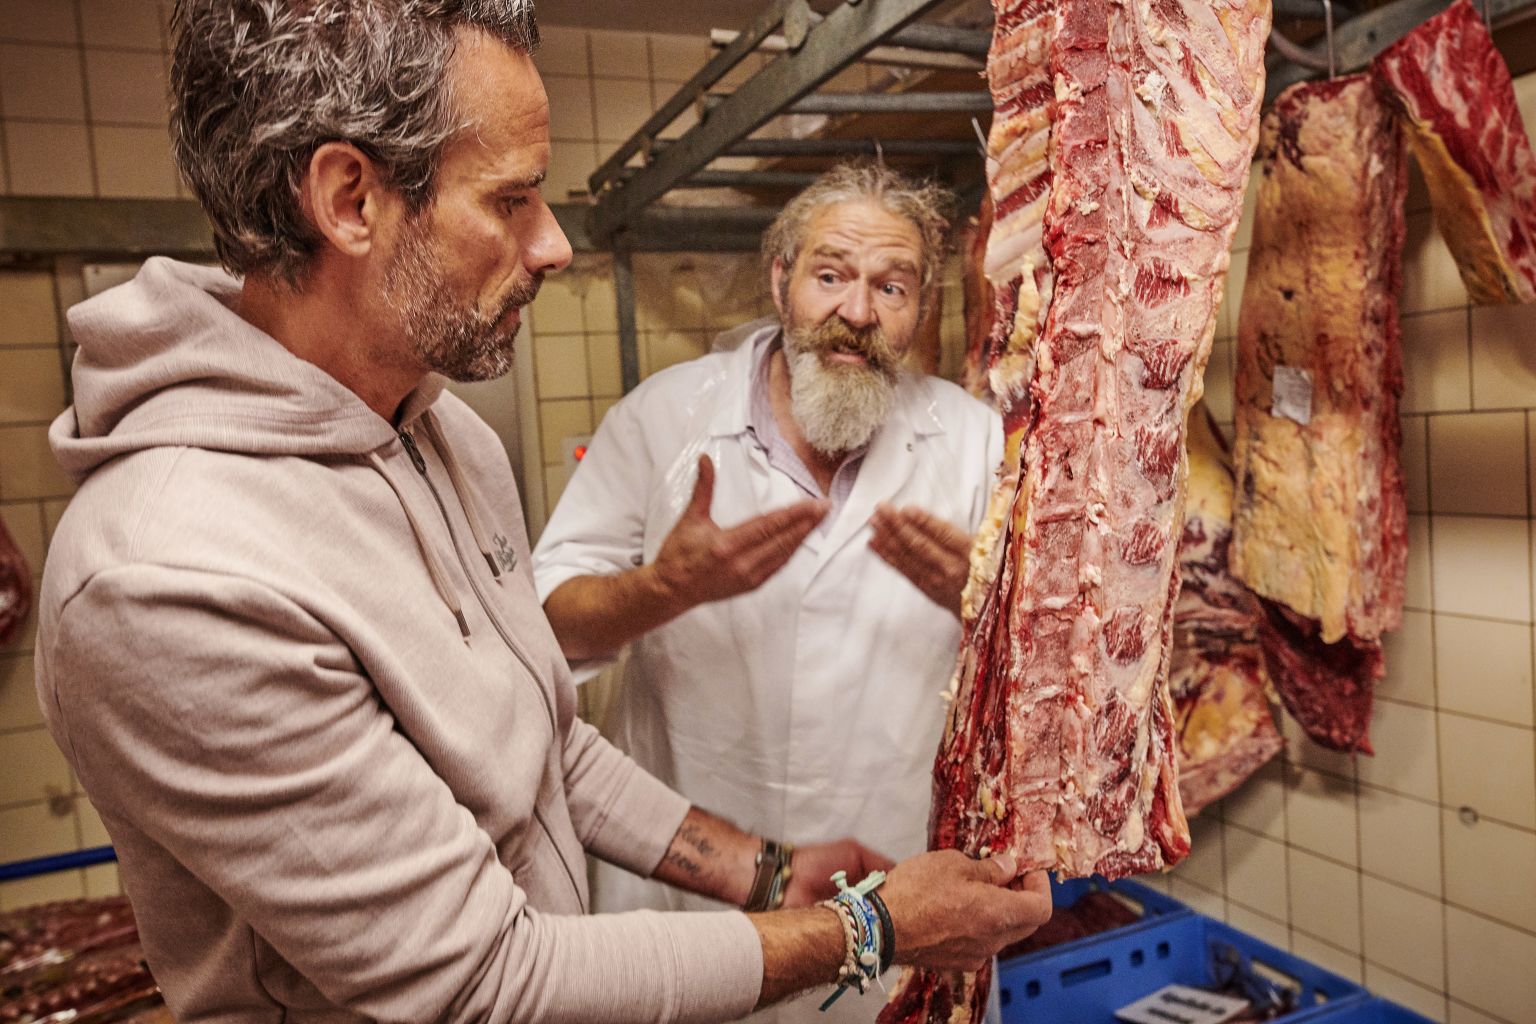 Meat selection with chef Pierre Crepaud. Valais, Switzerland